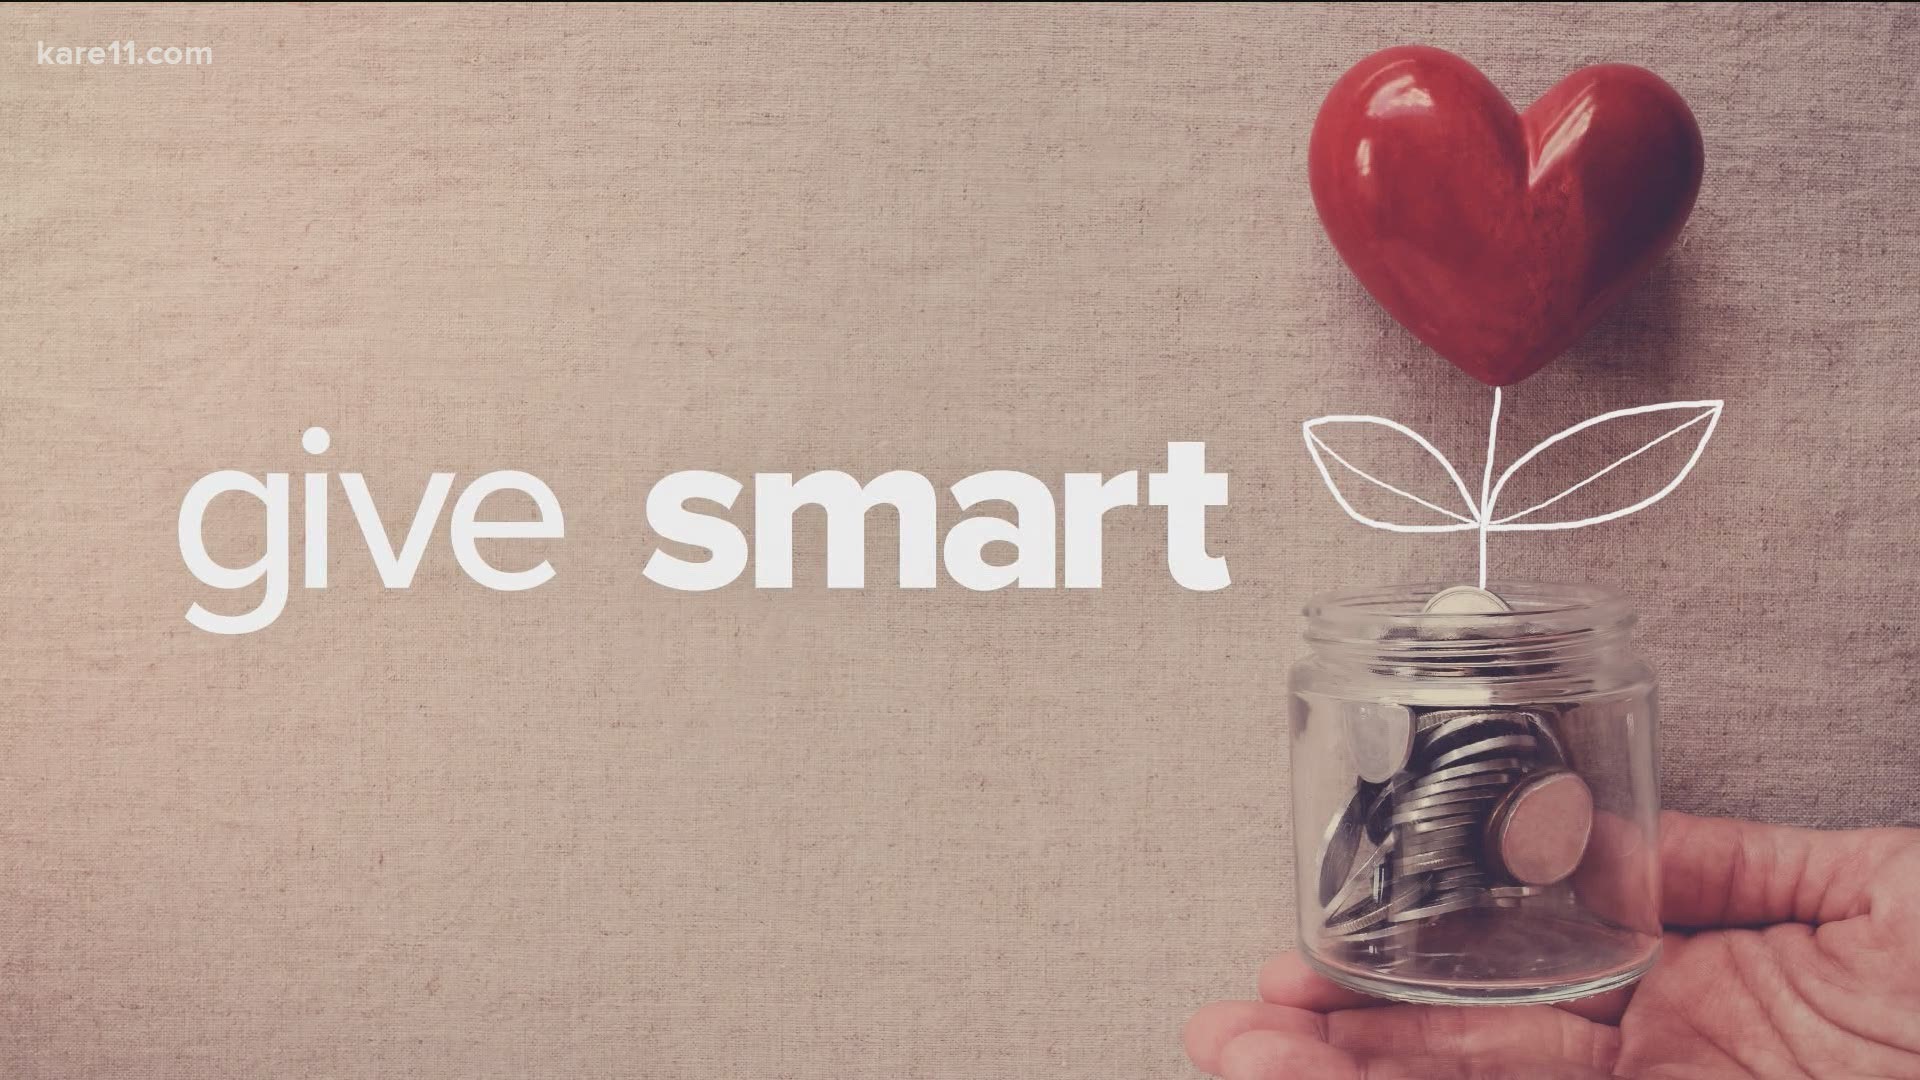 As part of the 'Give Smart' series, here's information about giving back to those in need